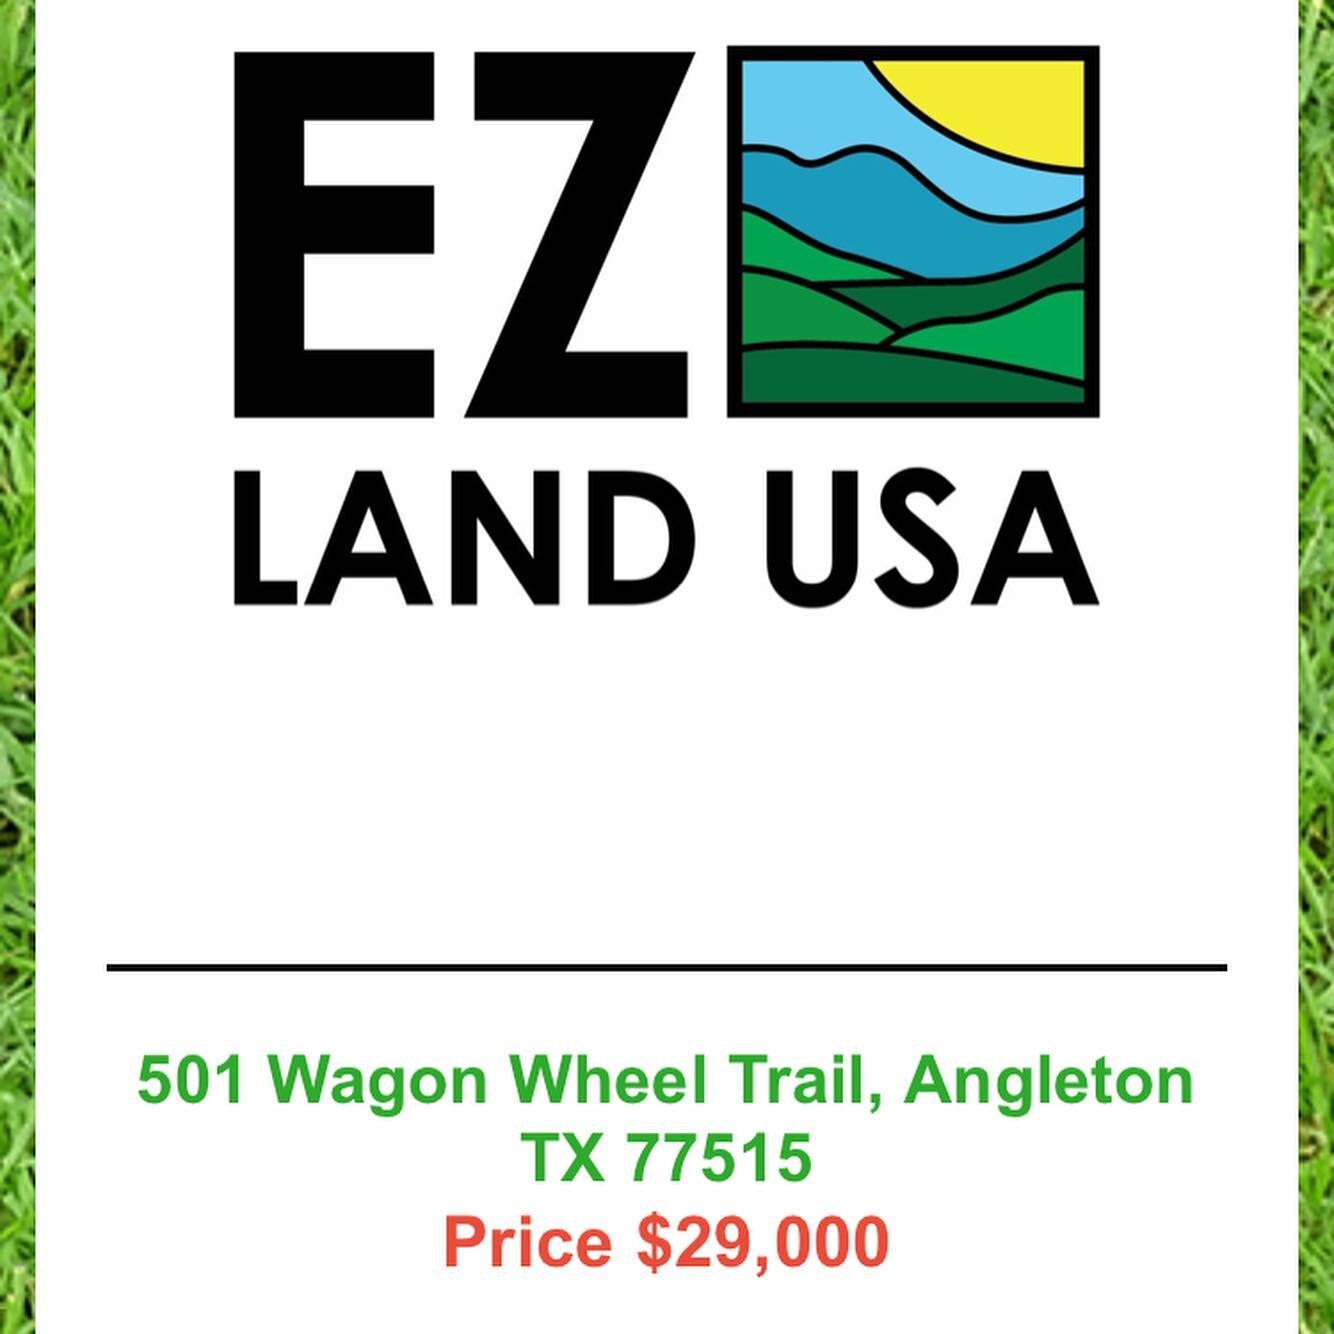 BAR X RANCH LOT FOR SALE 🔥🔥

501 Wagon Wheel Trail, Angleton
TX 77515
Price $29,000

Property details.
Vacant lot (39,204 )
(.90 Acre)
utilities: Light available. Need Septic &amp;
Water well
county: Brazoria
Subdivision: Bar X Ranch
Flood Zone 100